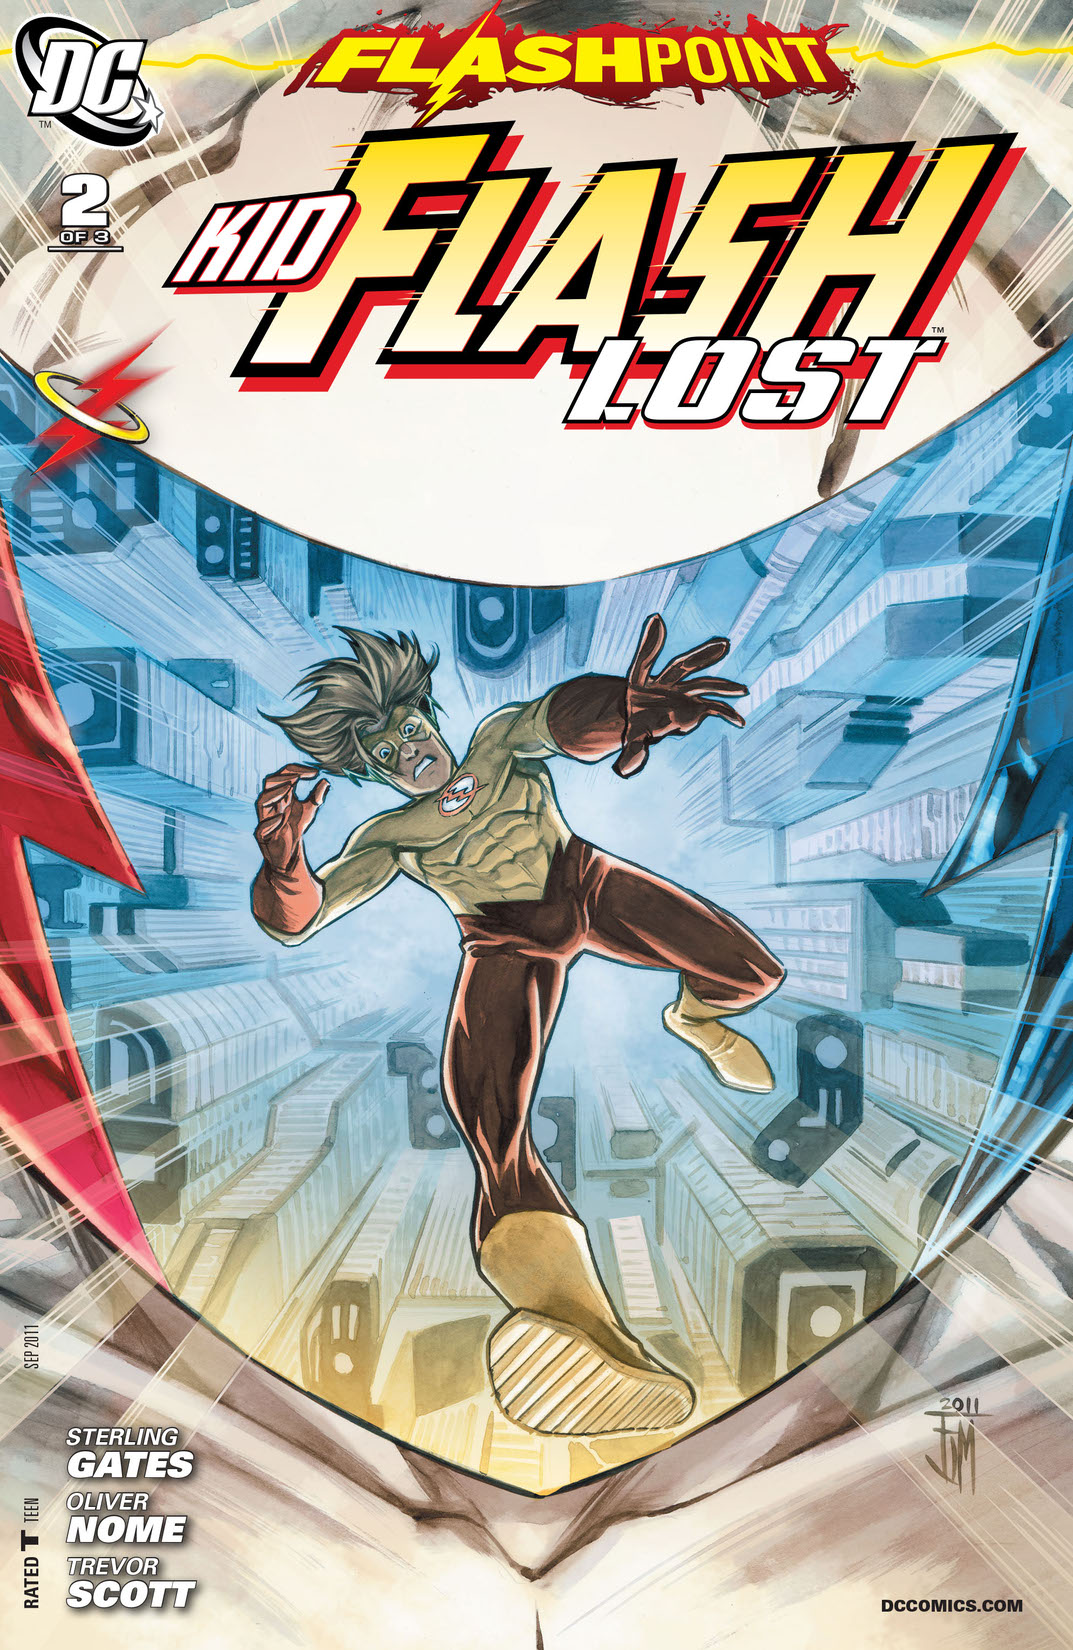 Flashpoint: Kid Flash Lost #2 preview images